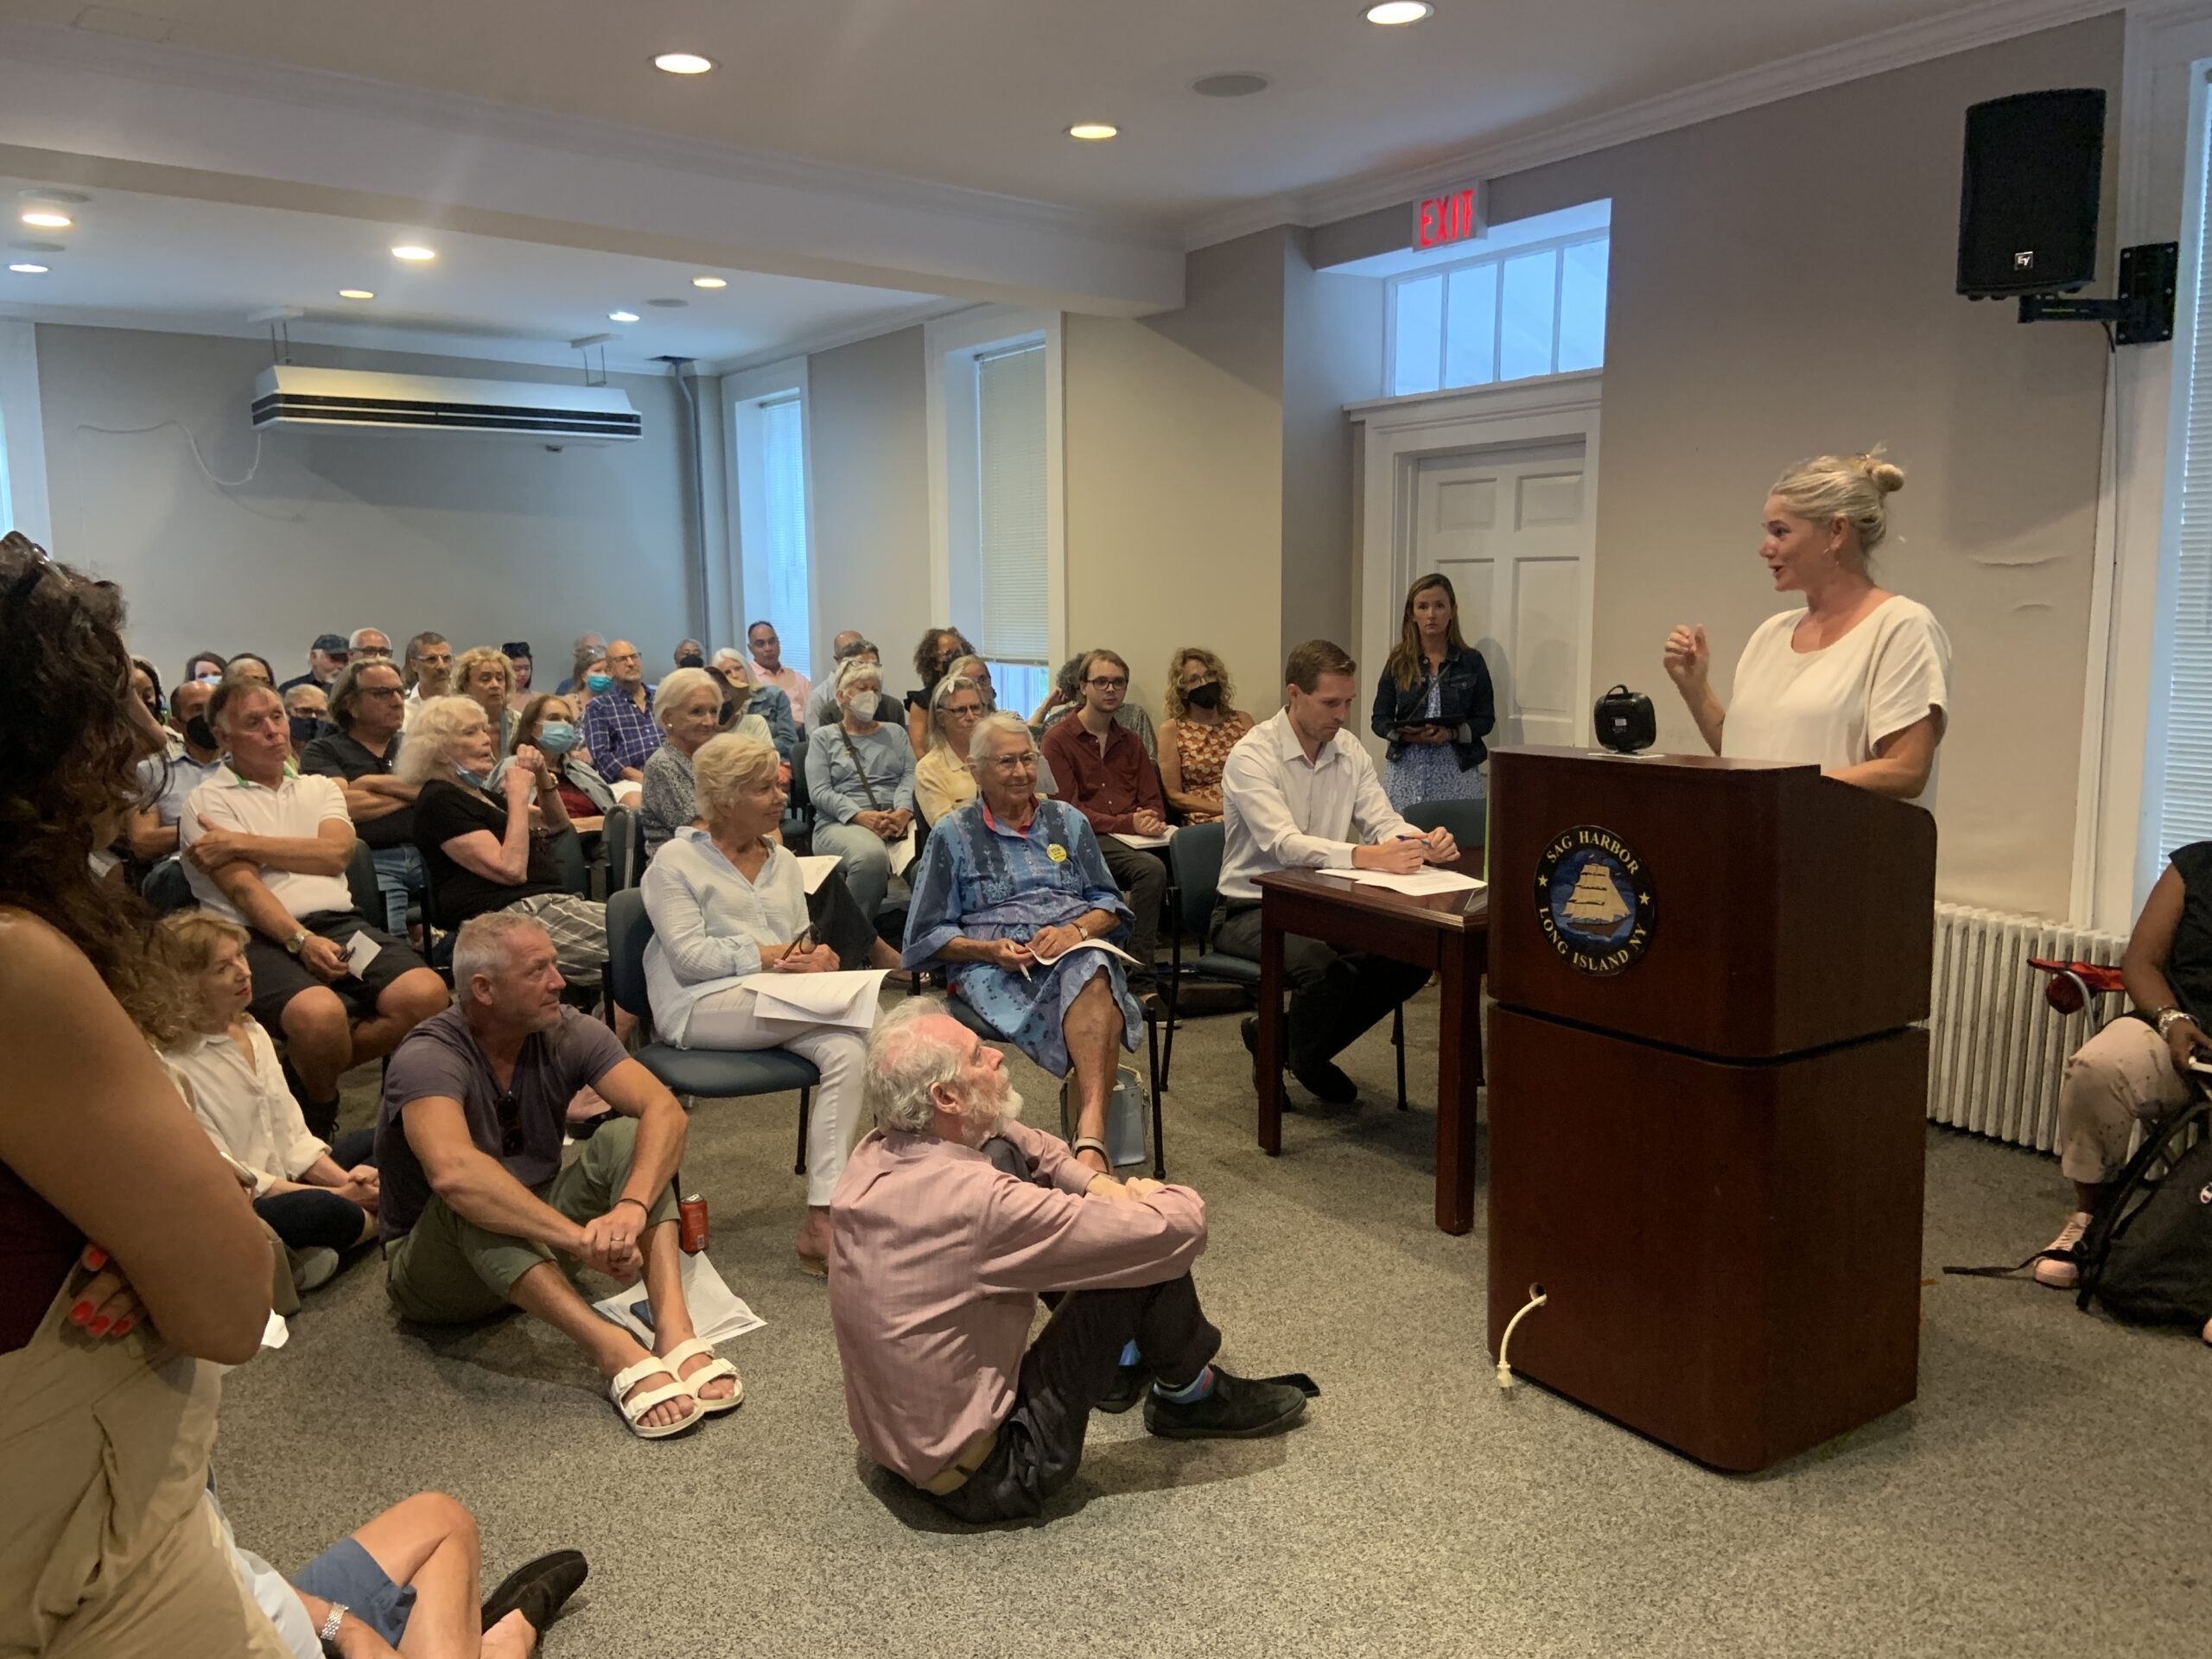 Bryony Freij of East End YIMBY gives an overview of the Community Housing Fund legislation that will be on the ballot in November at the Tuesday, August 9, Sag Harbor Village Board meeting. STEPHEN J. KOTZ